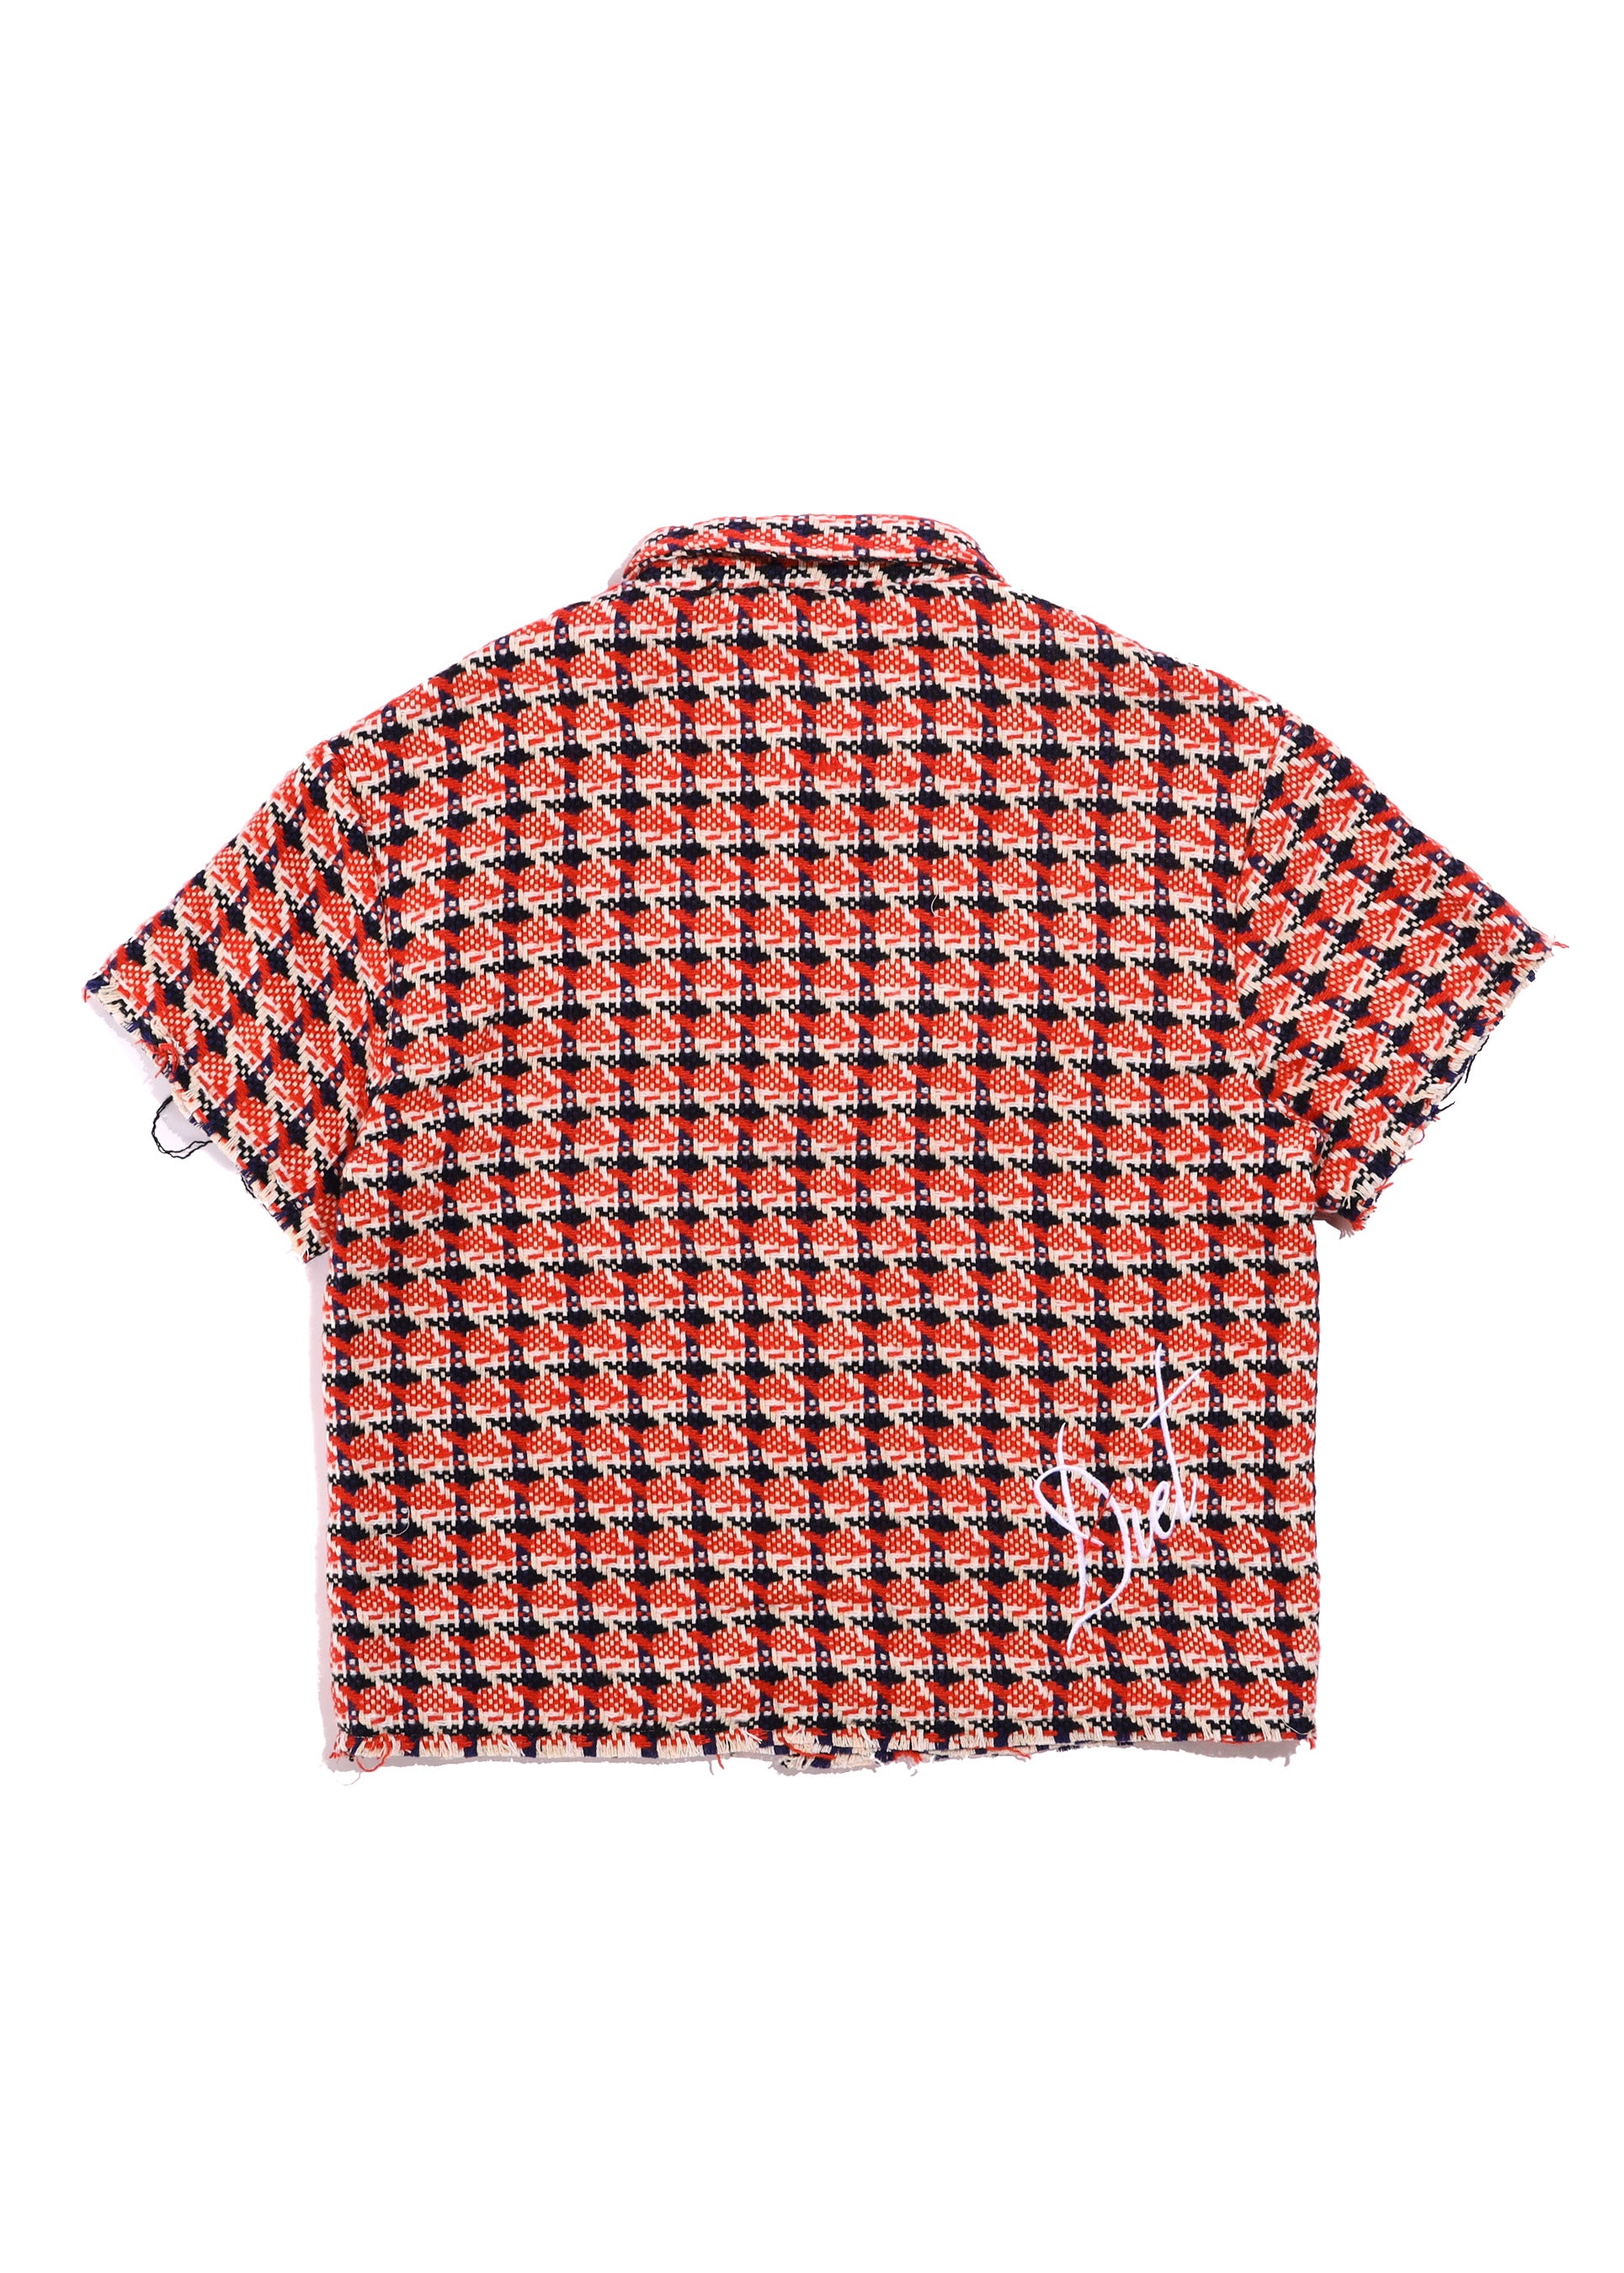 Tweed Button Up - Red